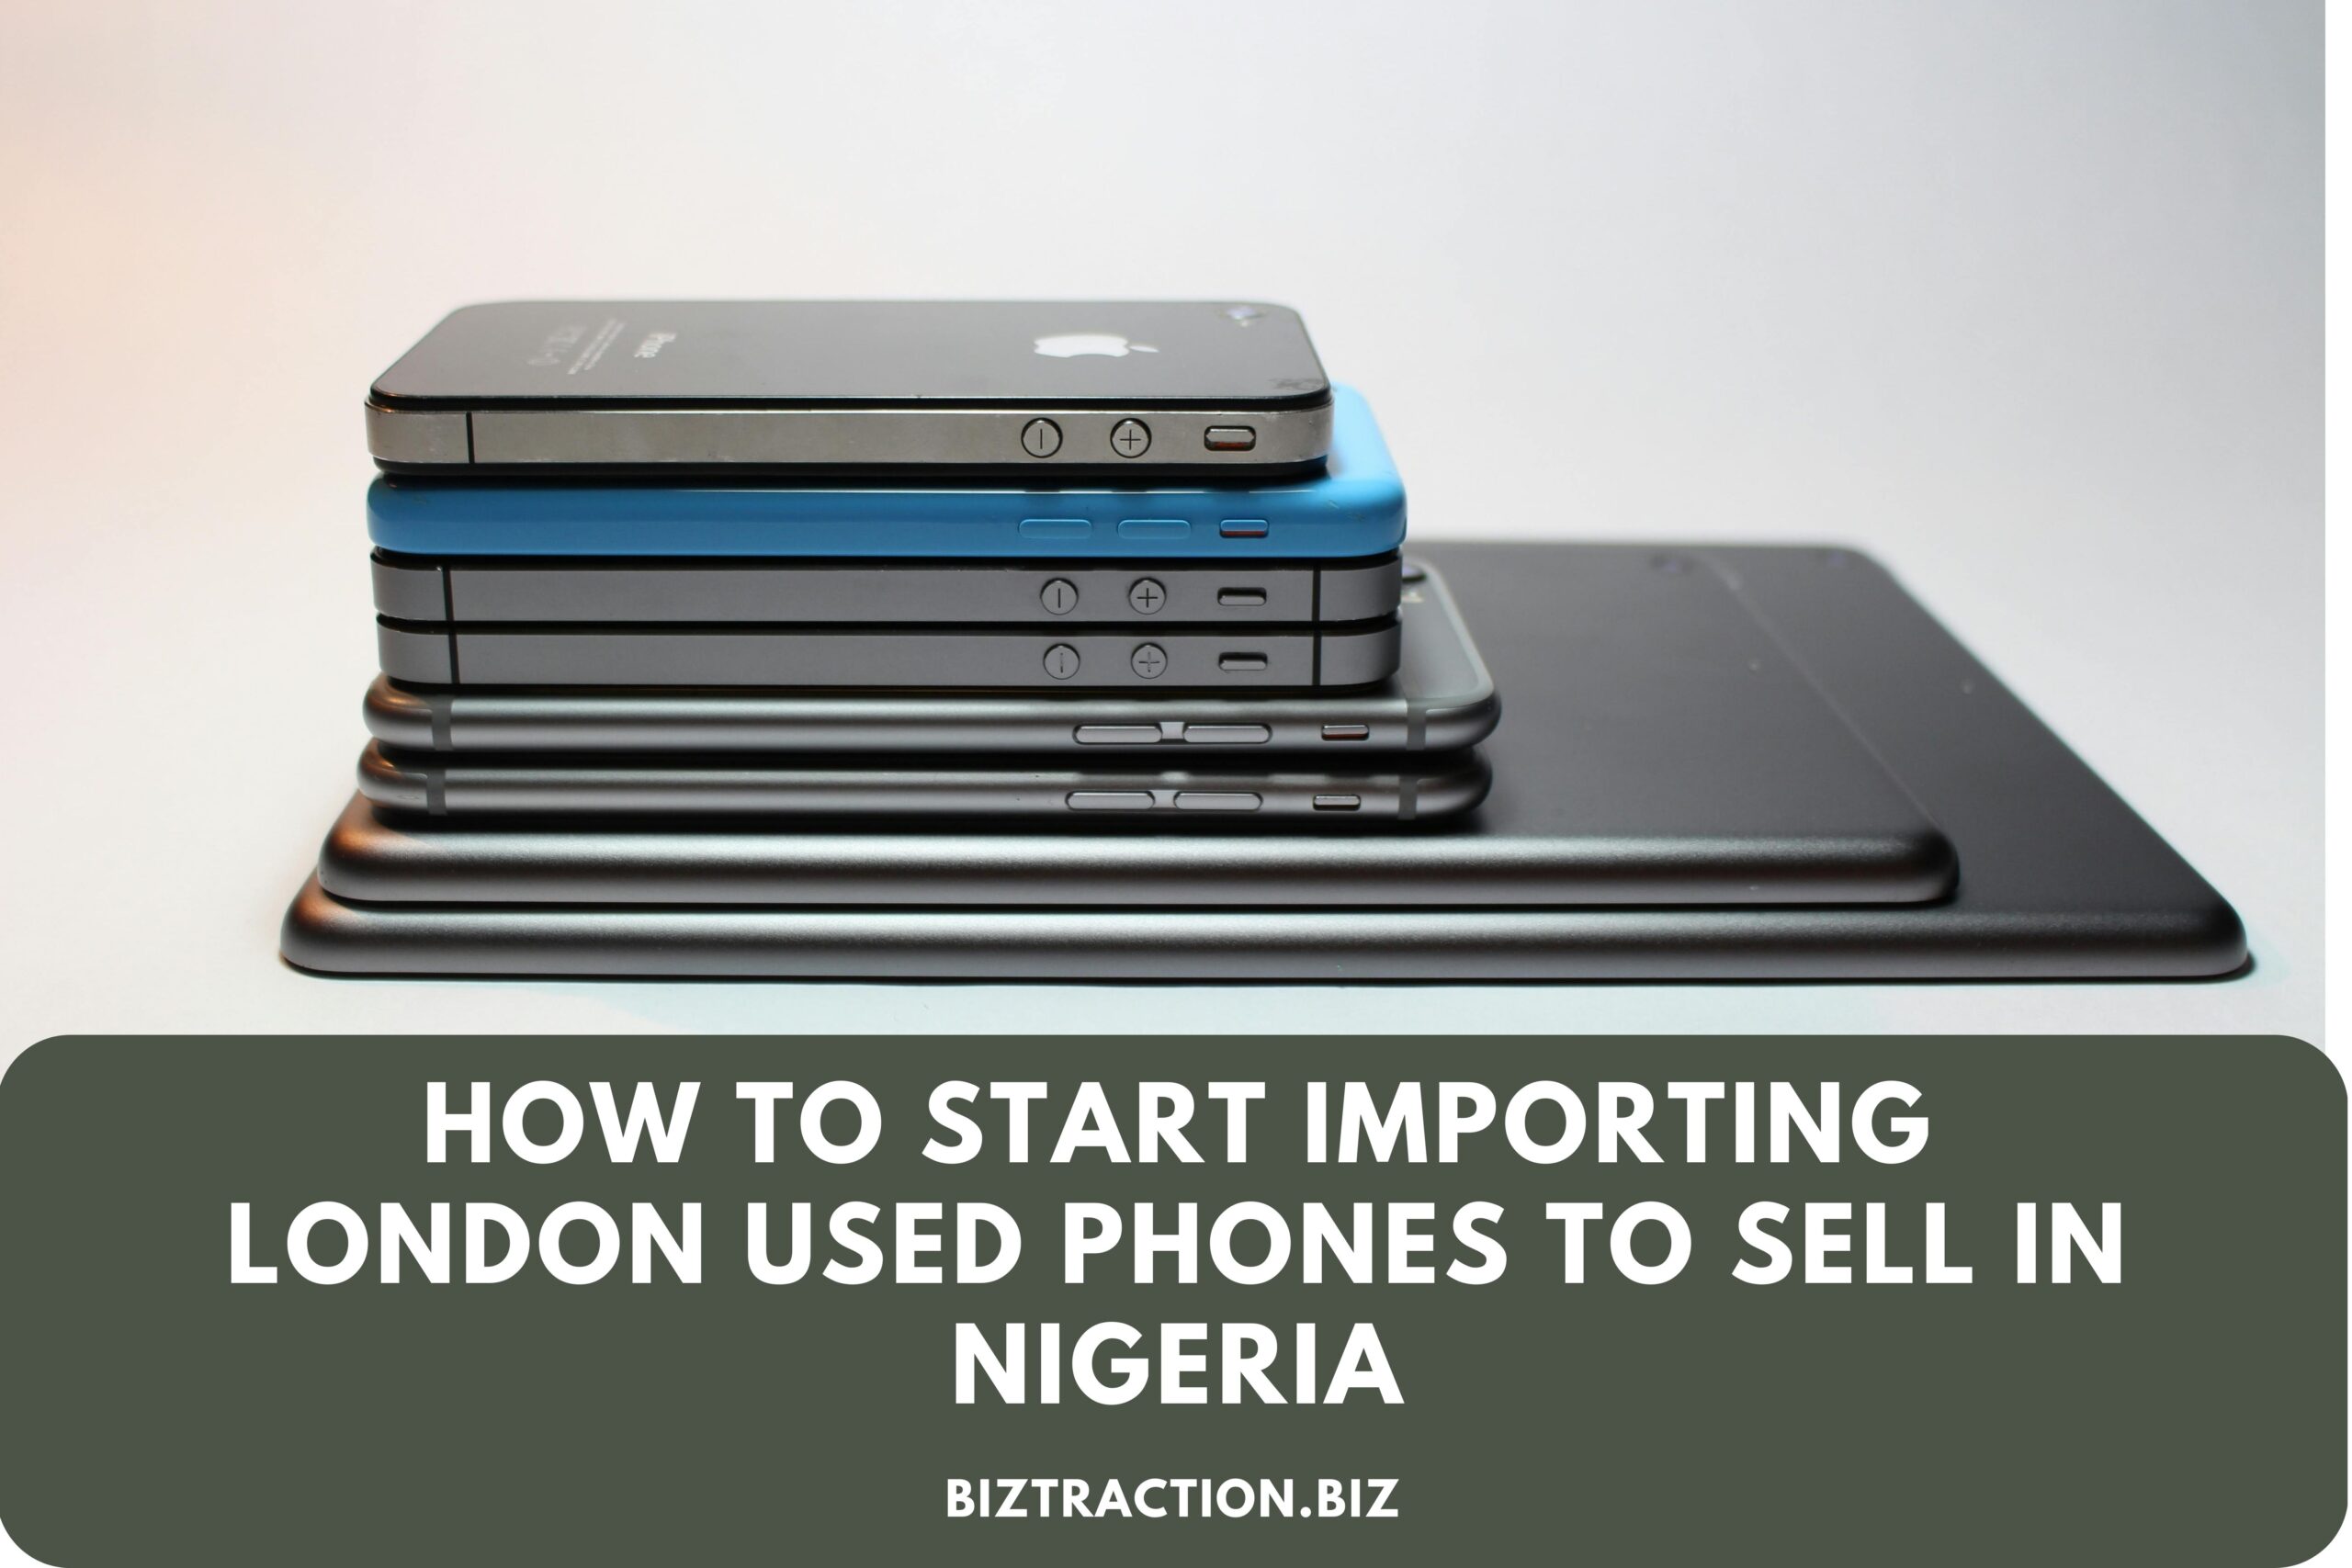 How to start importing London used phones to sell in Nigeria